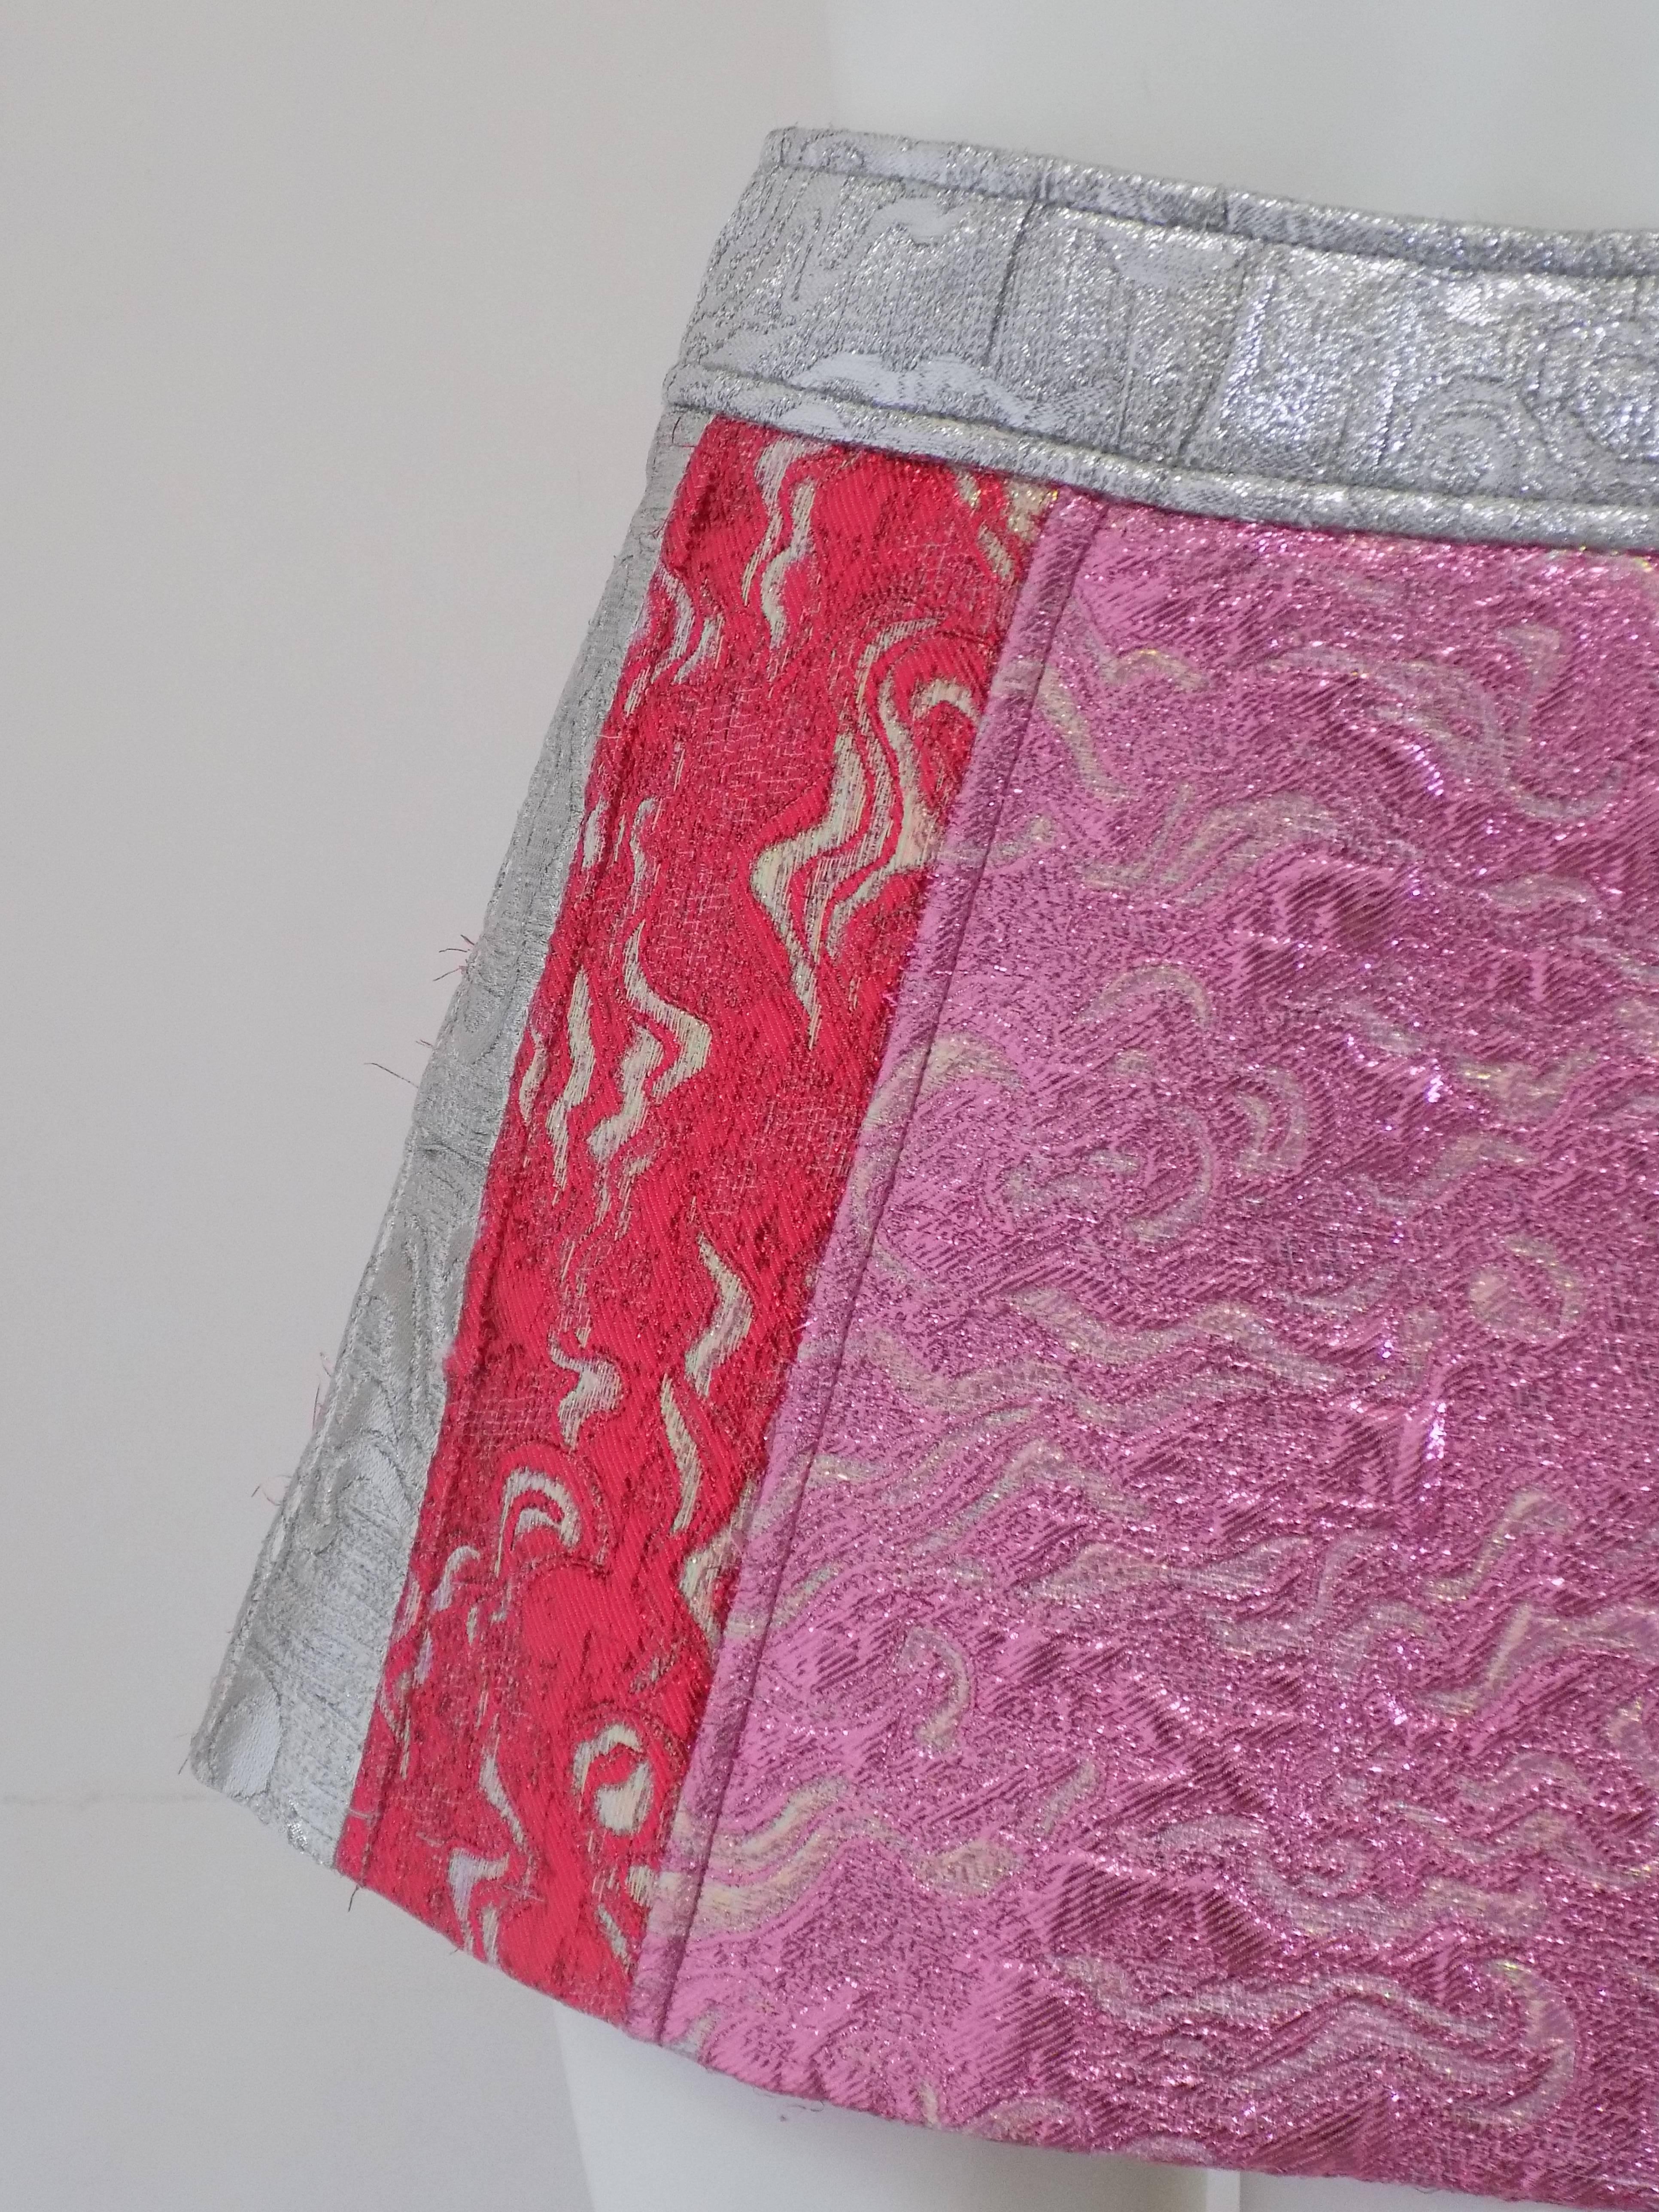 Miu Miu multicolour silver red pink skirt totally made in italy in italian size range 38
total lenght 68
wait 72